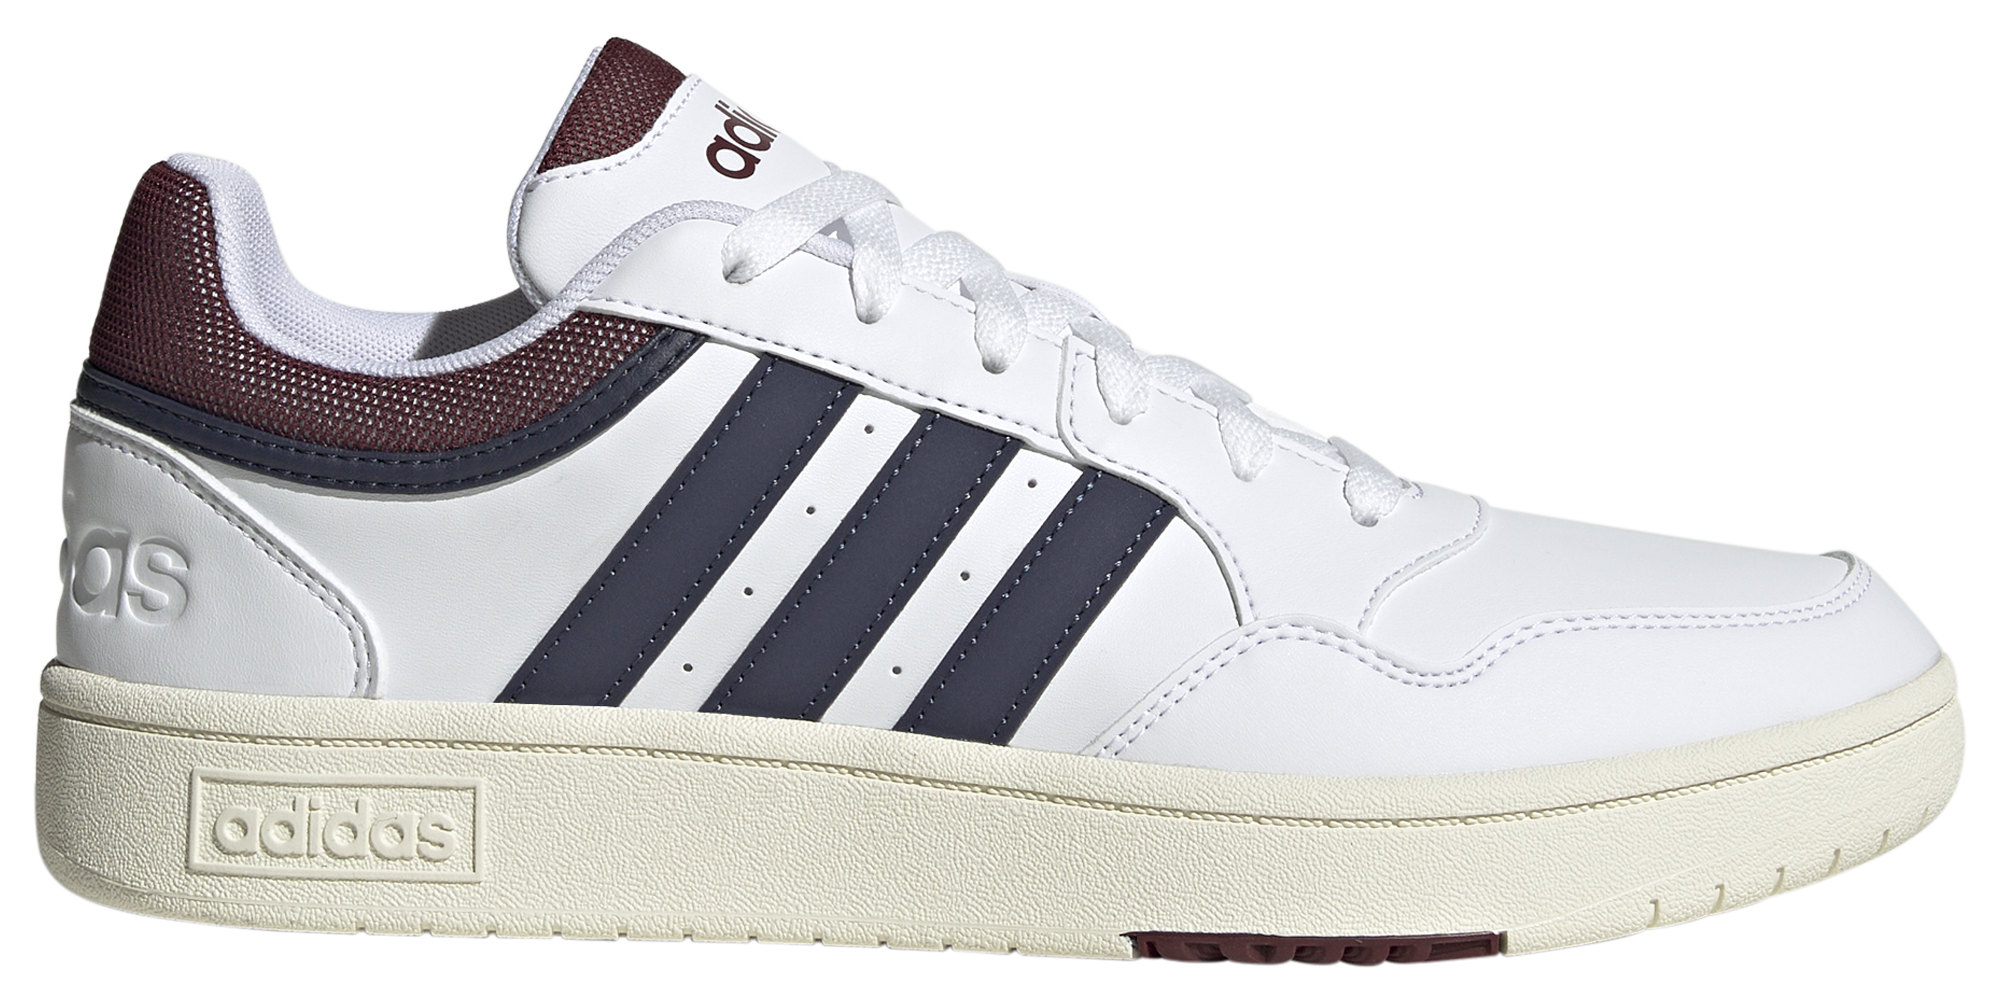 adidas Hoops 3.0 Low Classic Vintage Basketball Shoes